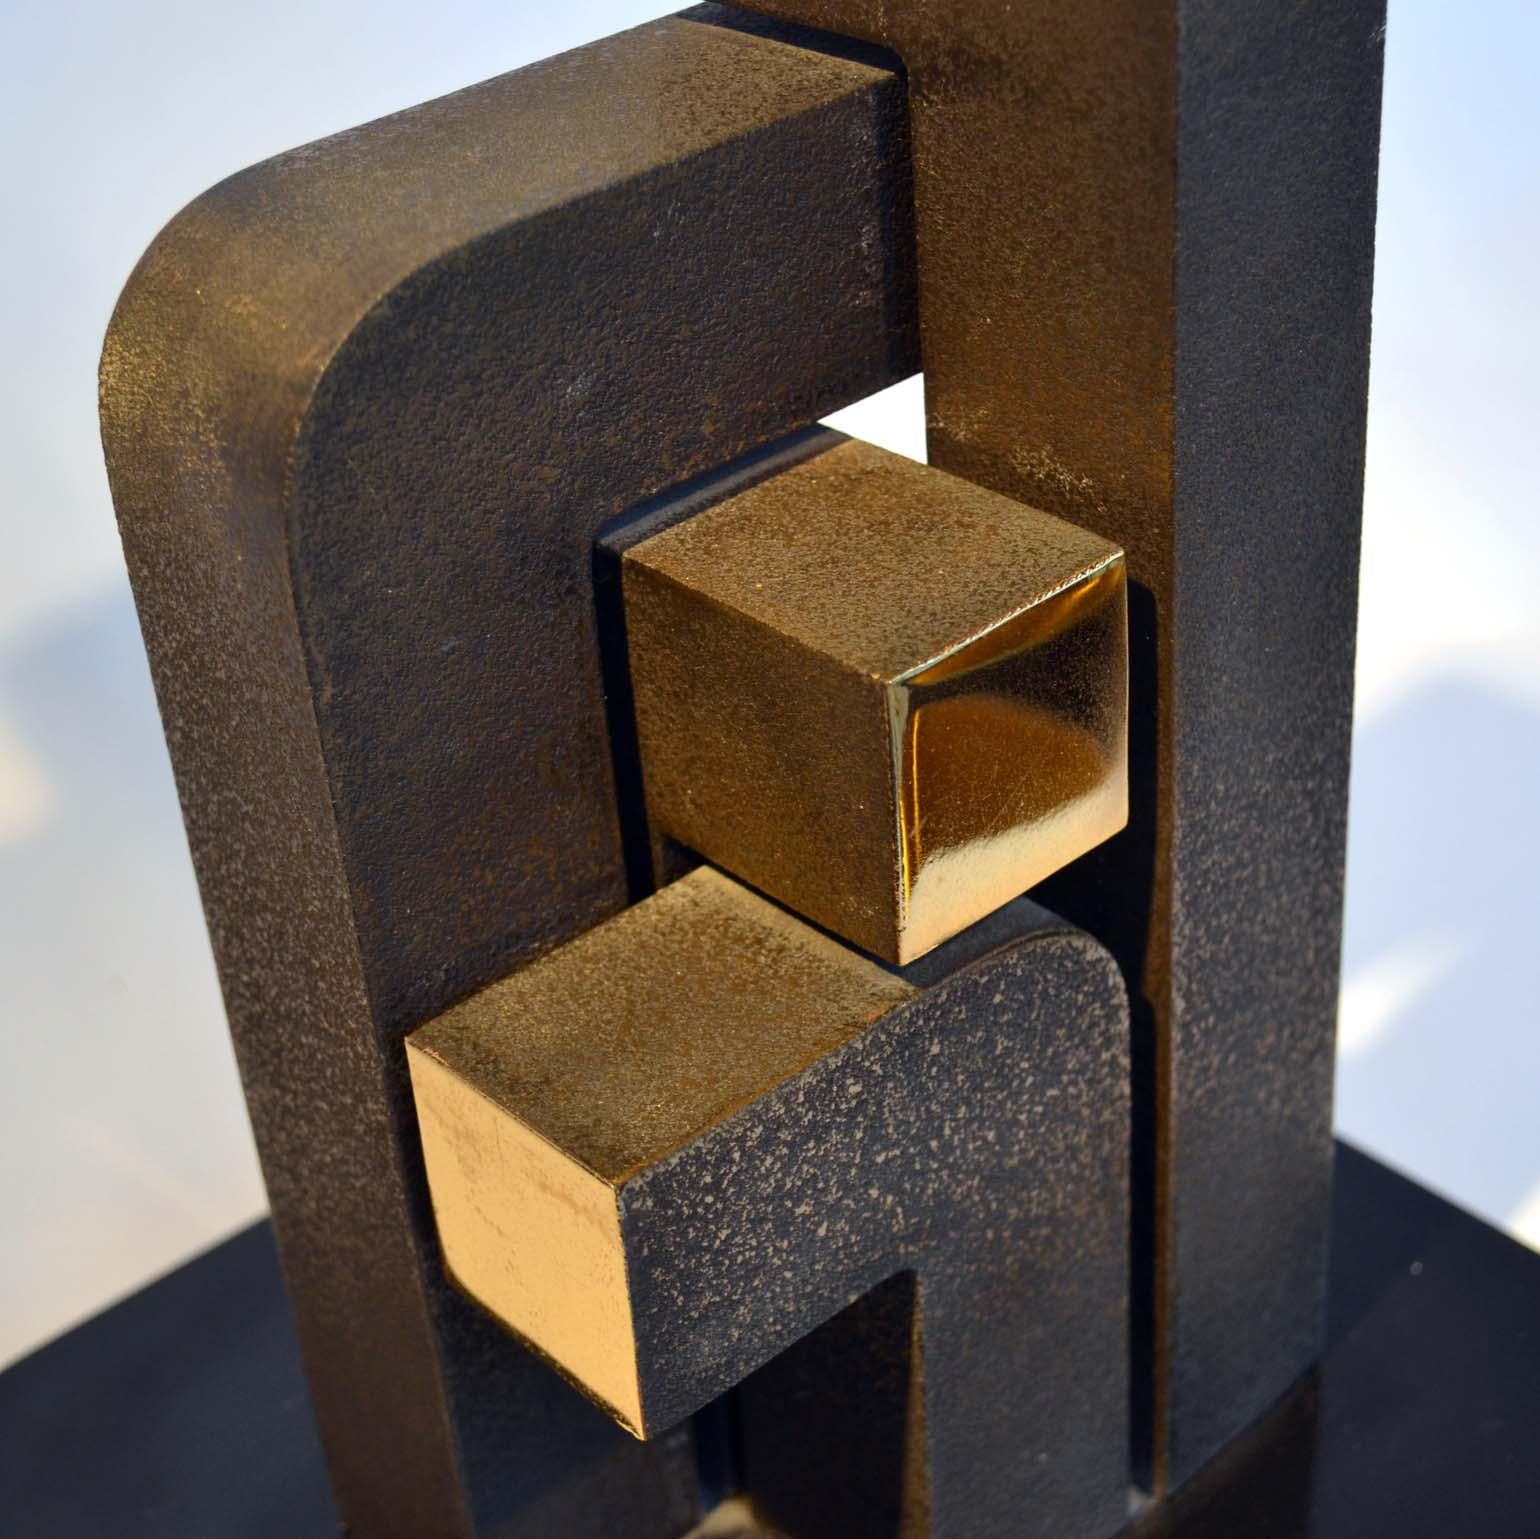 Abstract Geometric Minimalist Bronze Sculpture by Zonena 1979 in Limited Edition 2